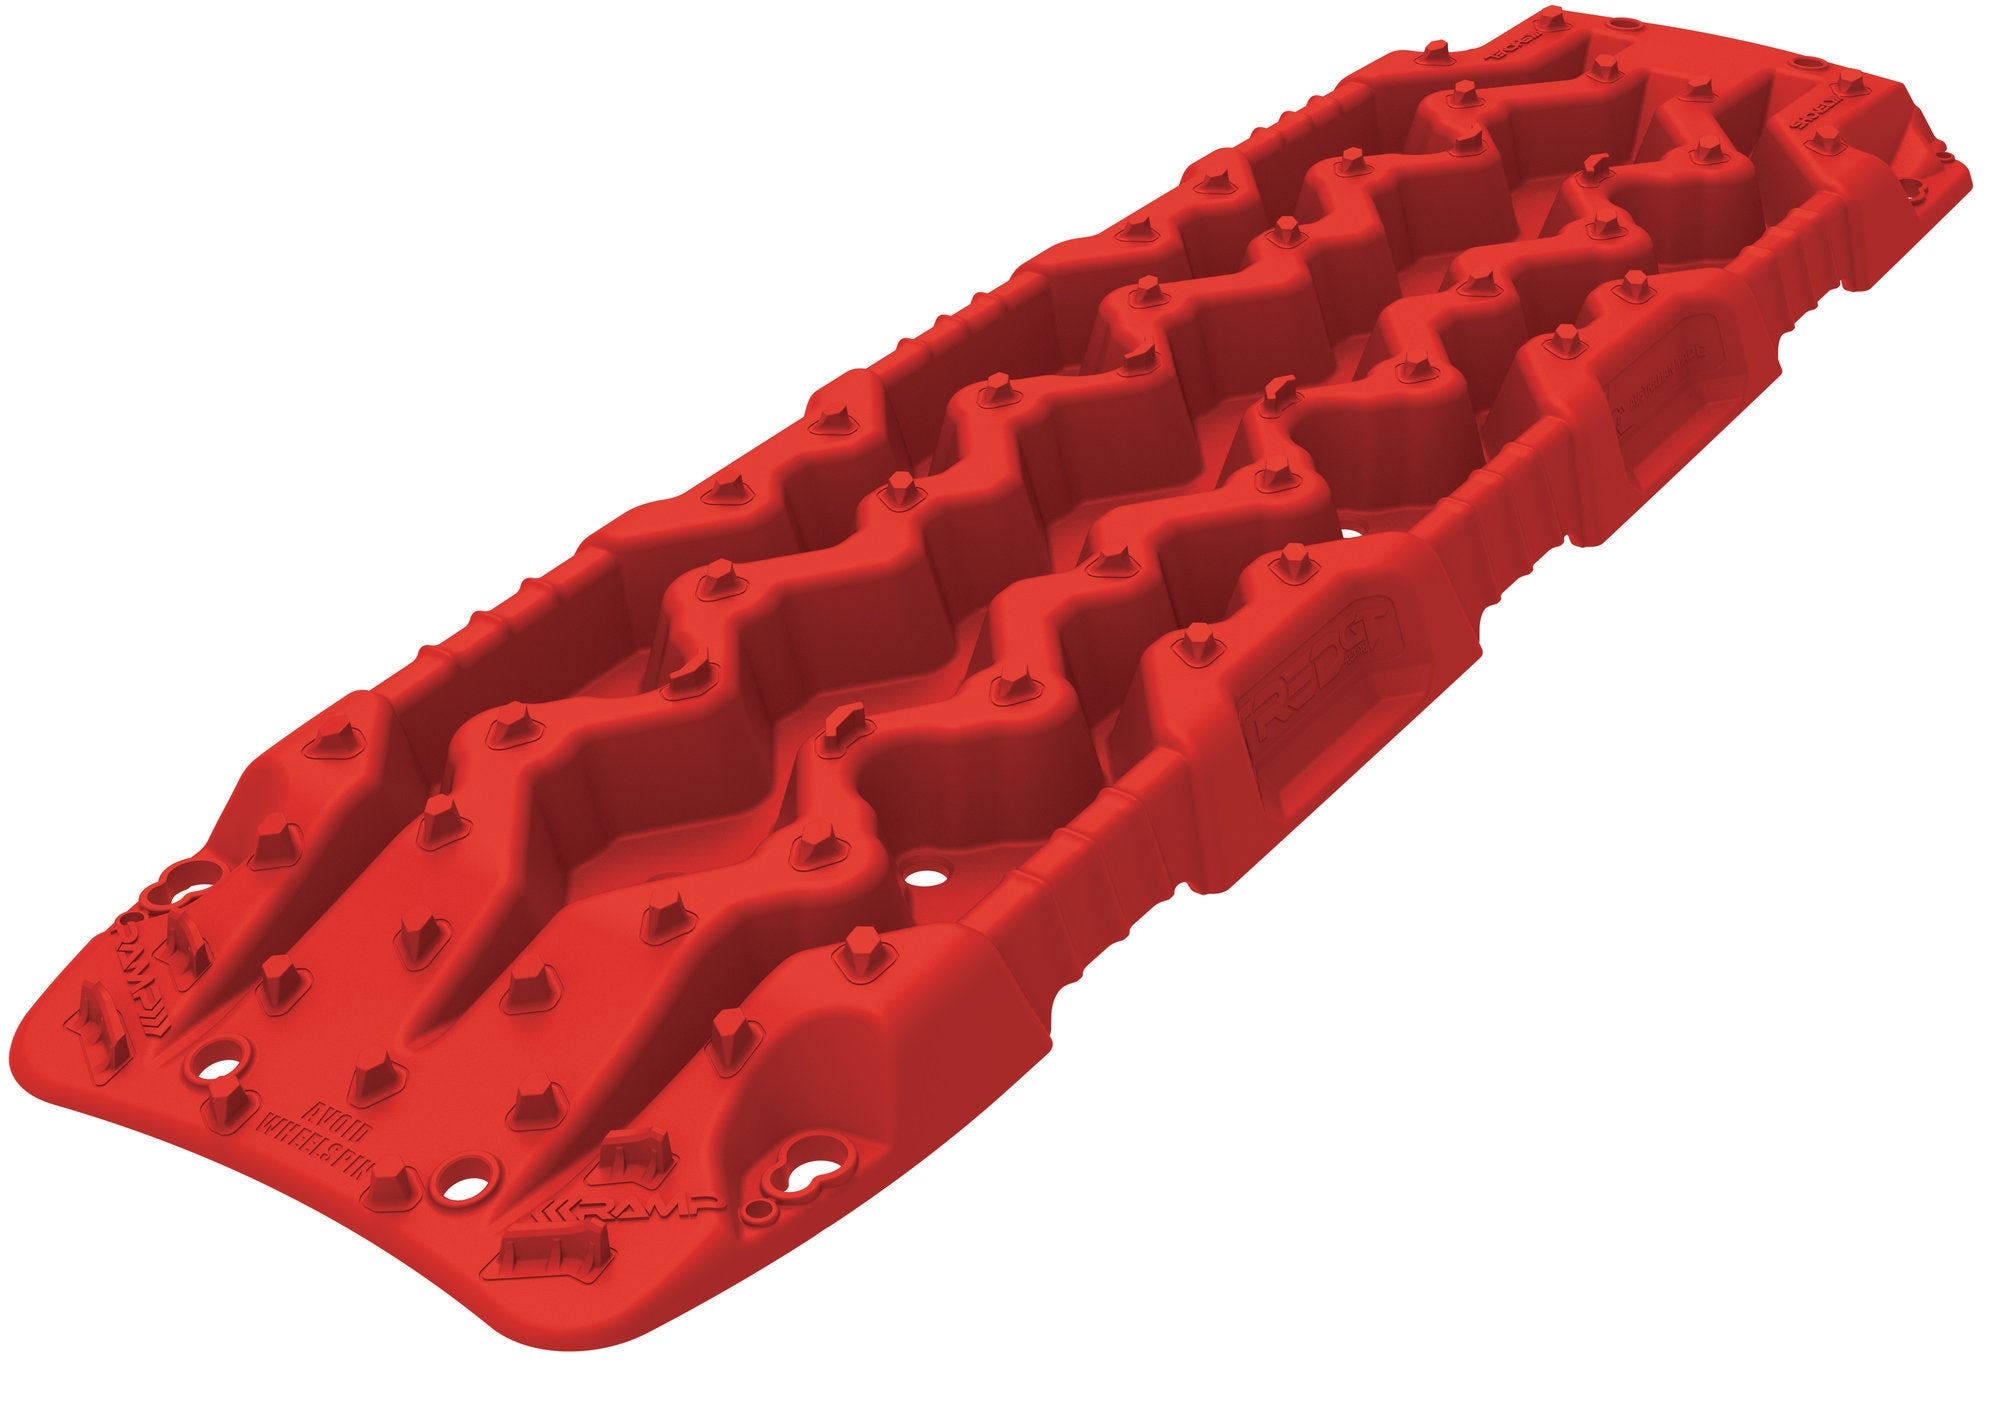 ARB Tred GT Recovery Boards - Red